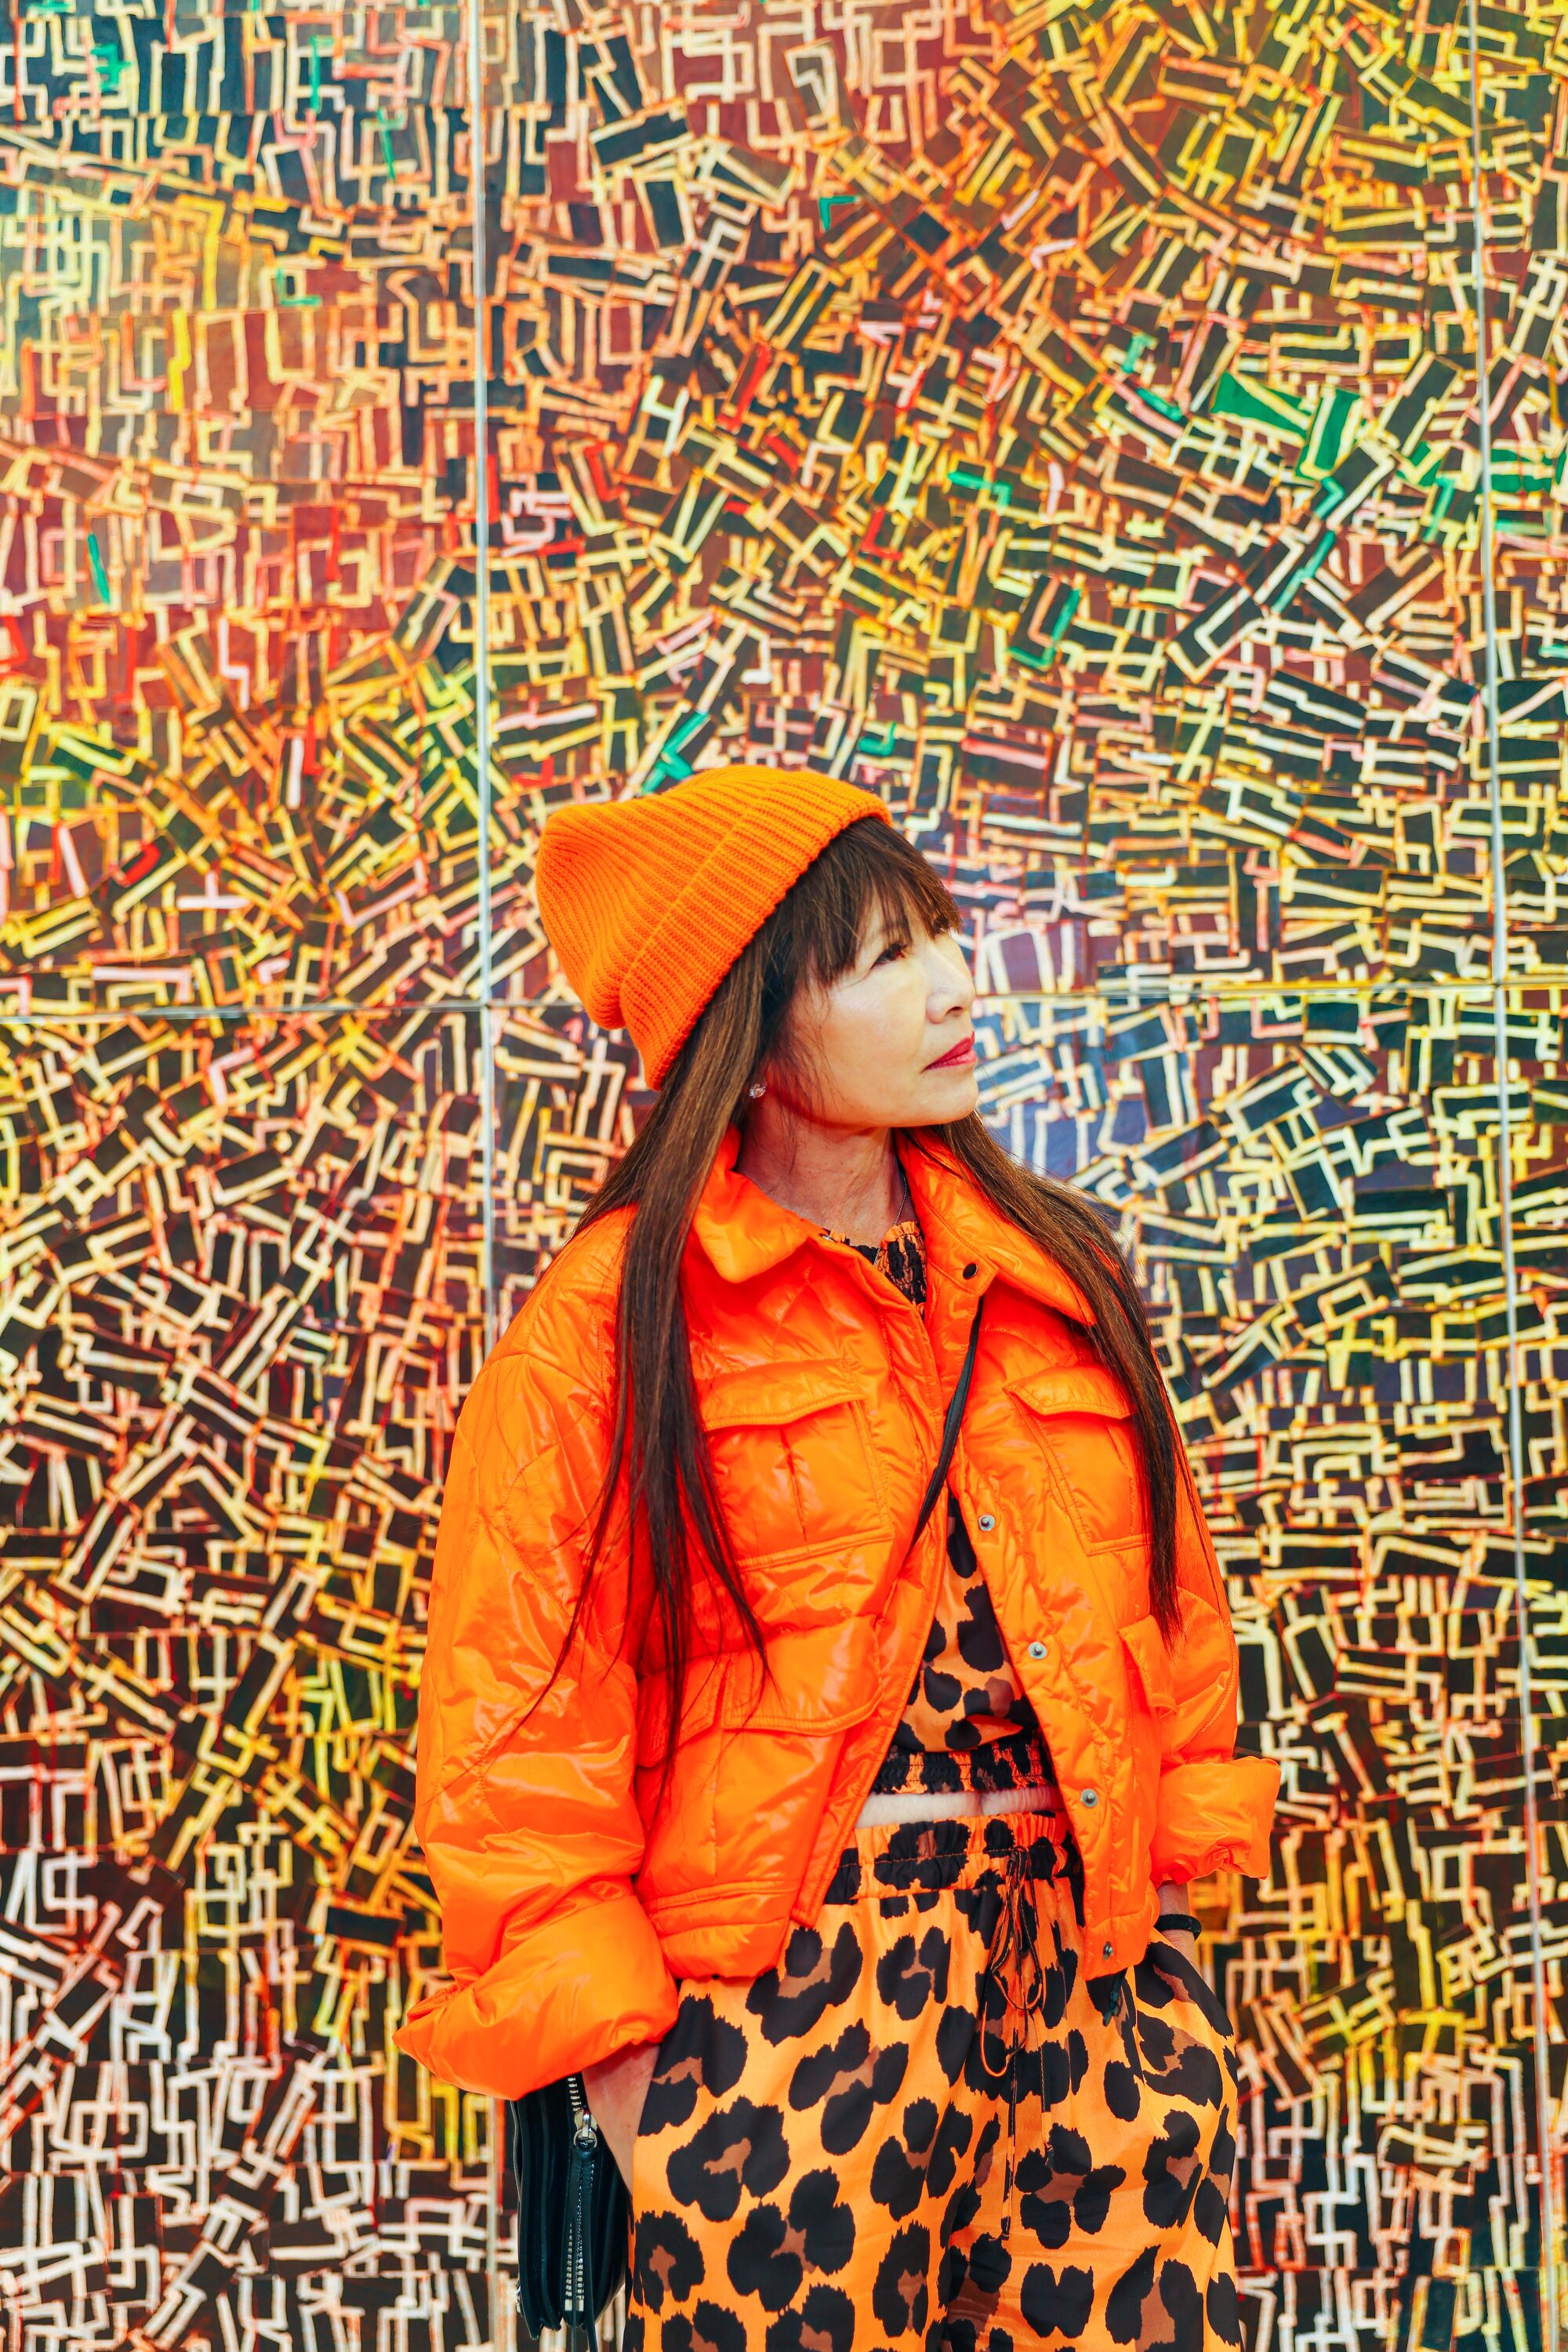 A person poses in front of a work of art.